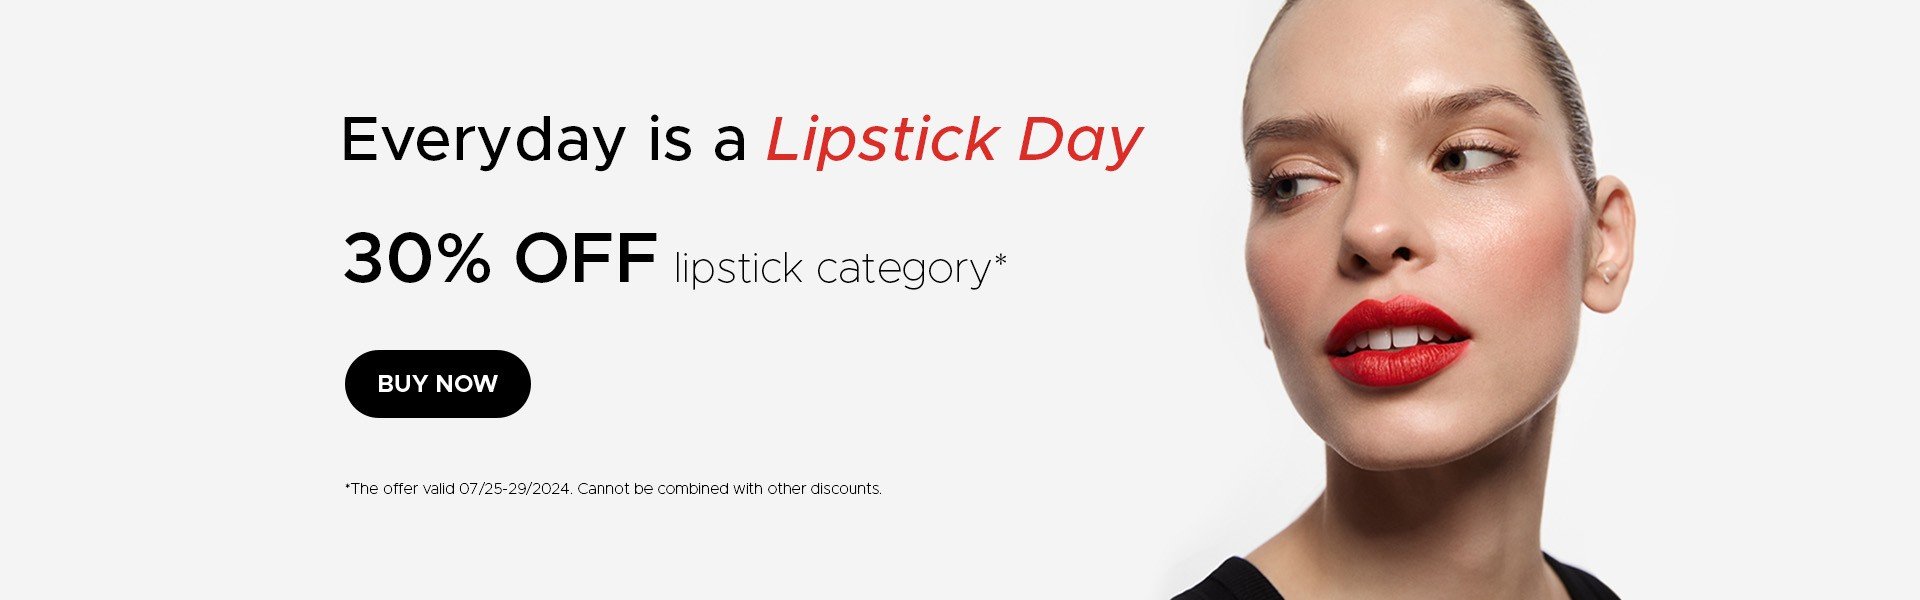 30% off the lipstick category